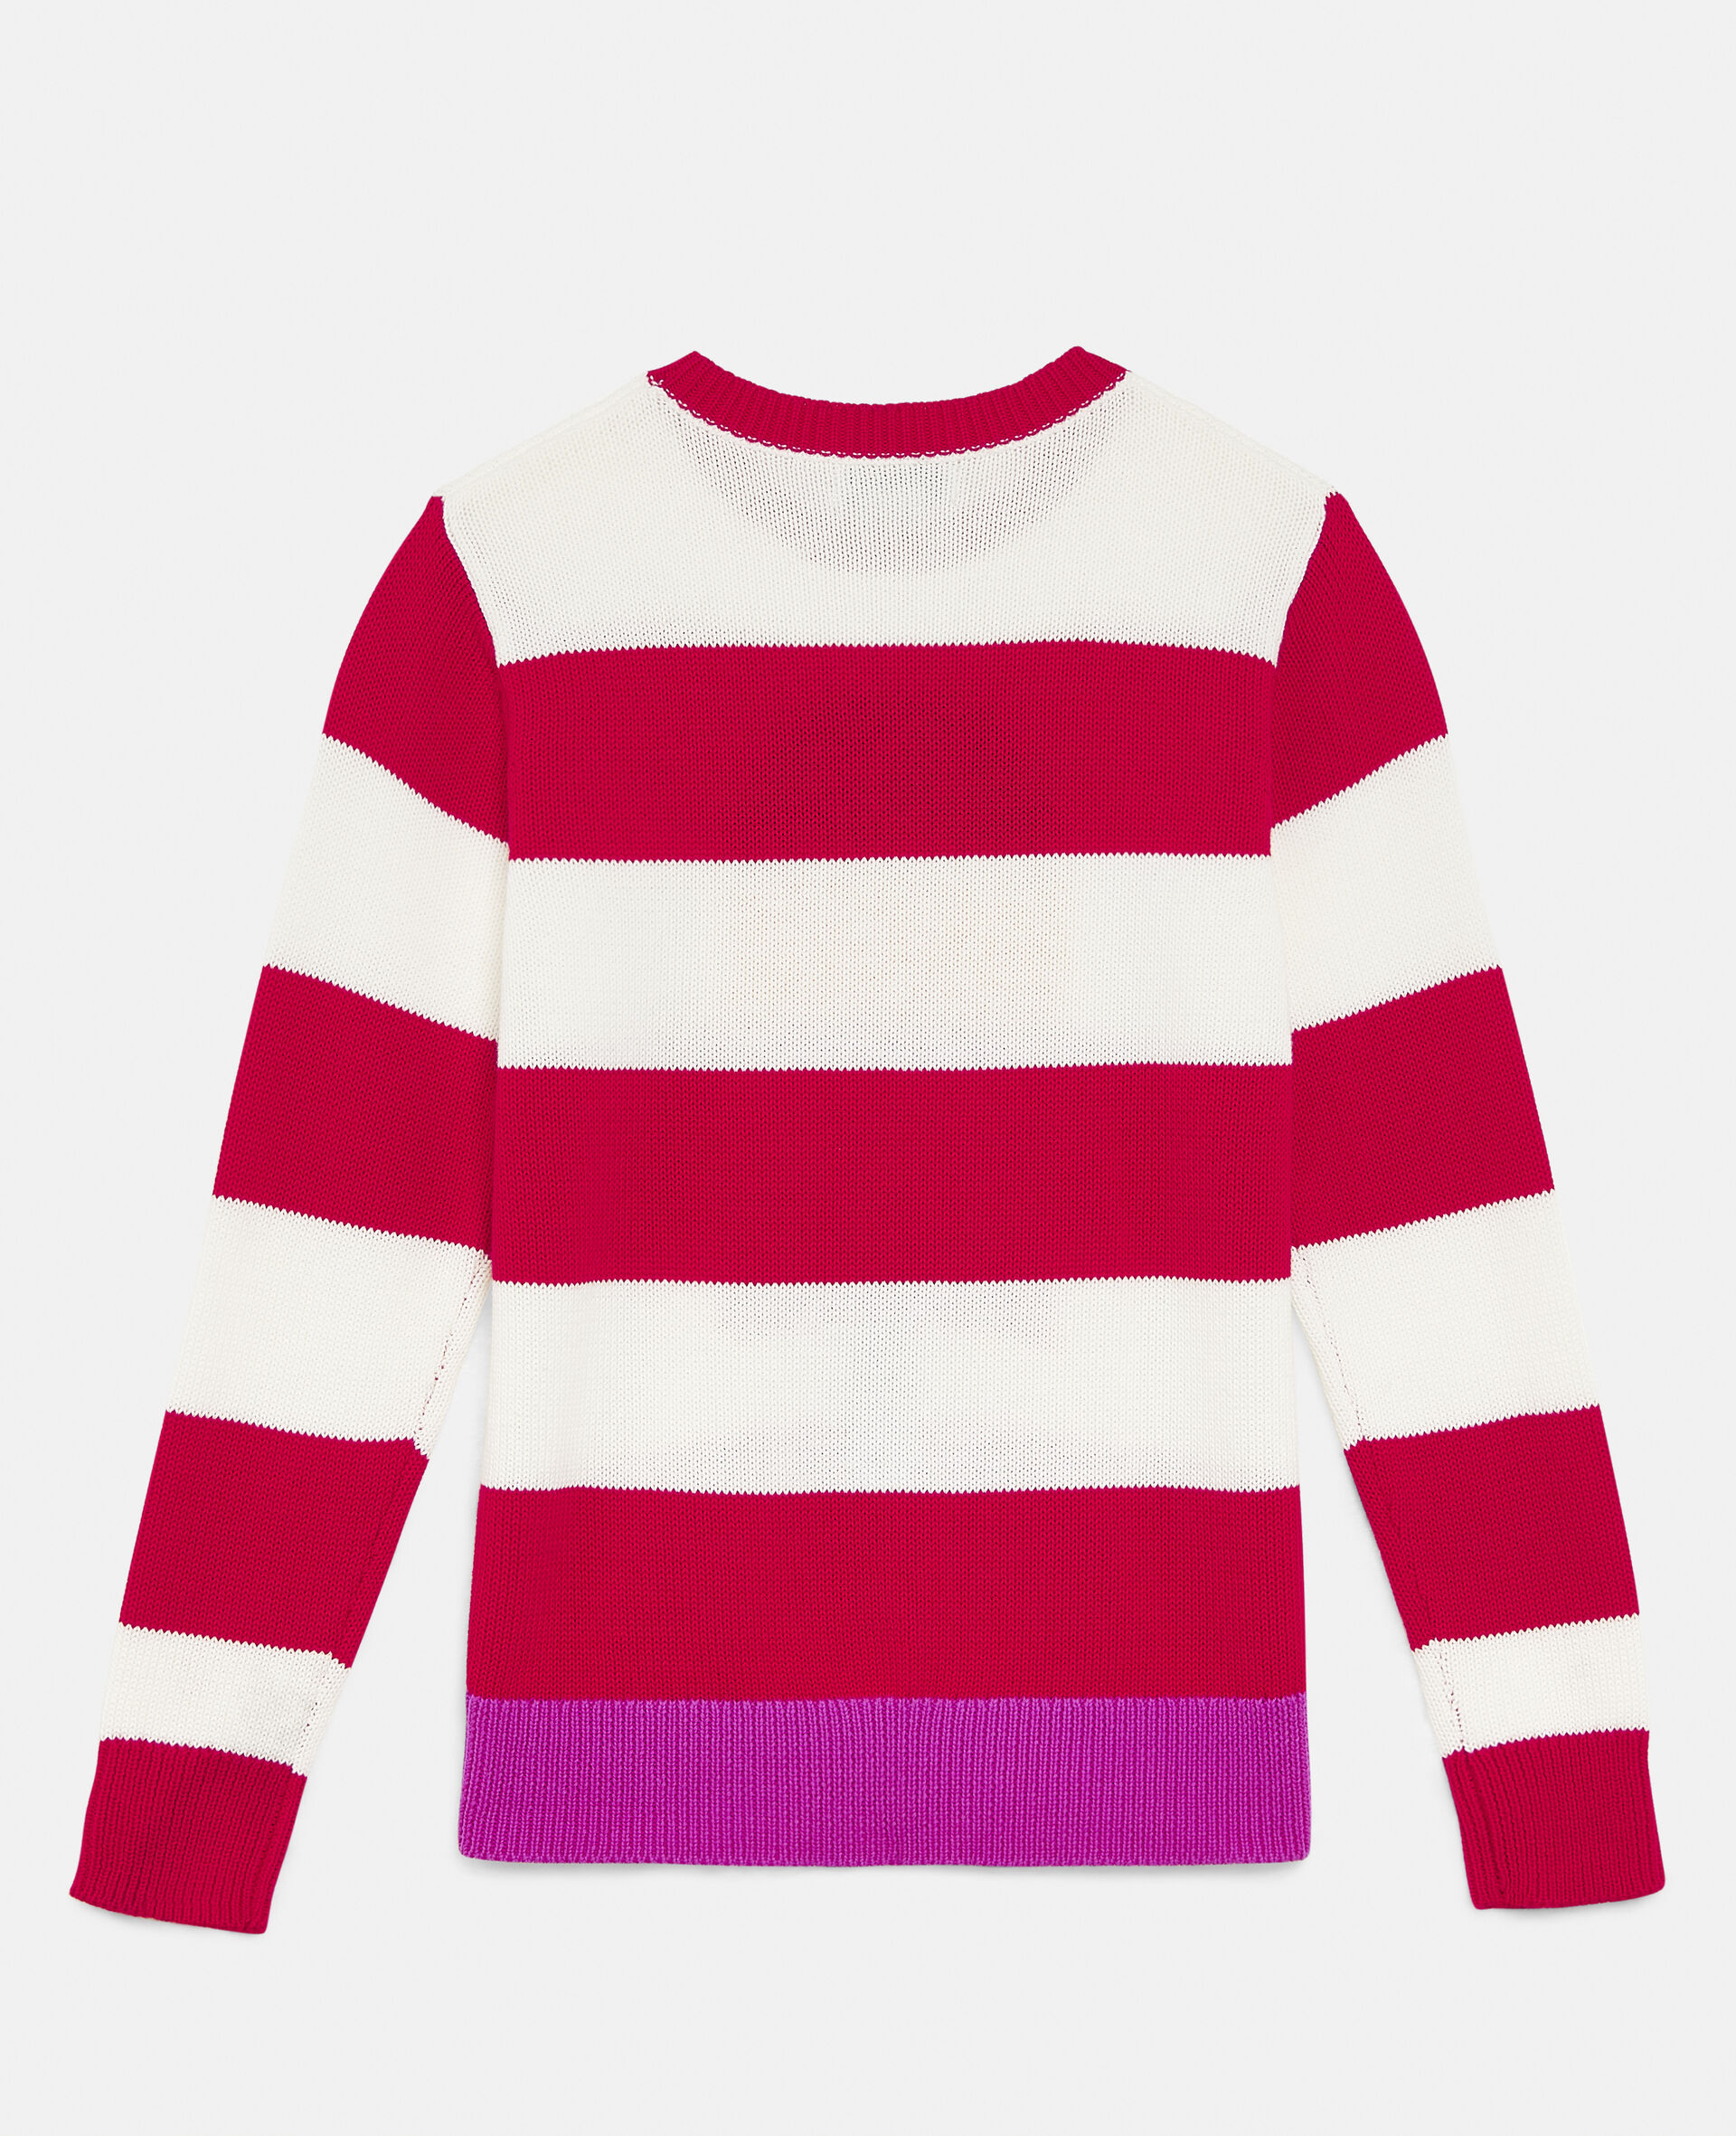 Popsicle Intarsia Knit Jumper-Multicolour-large image number 2